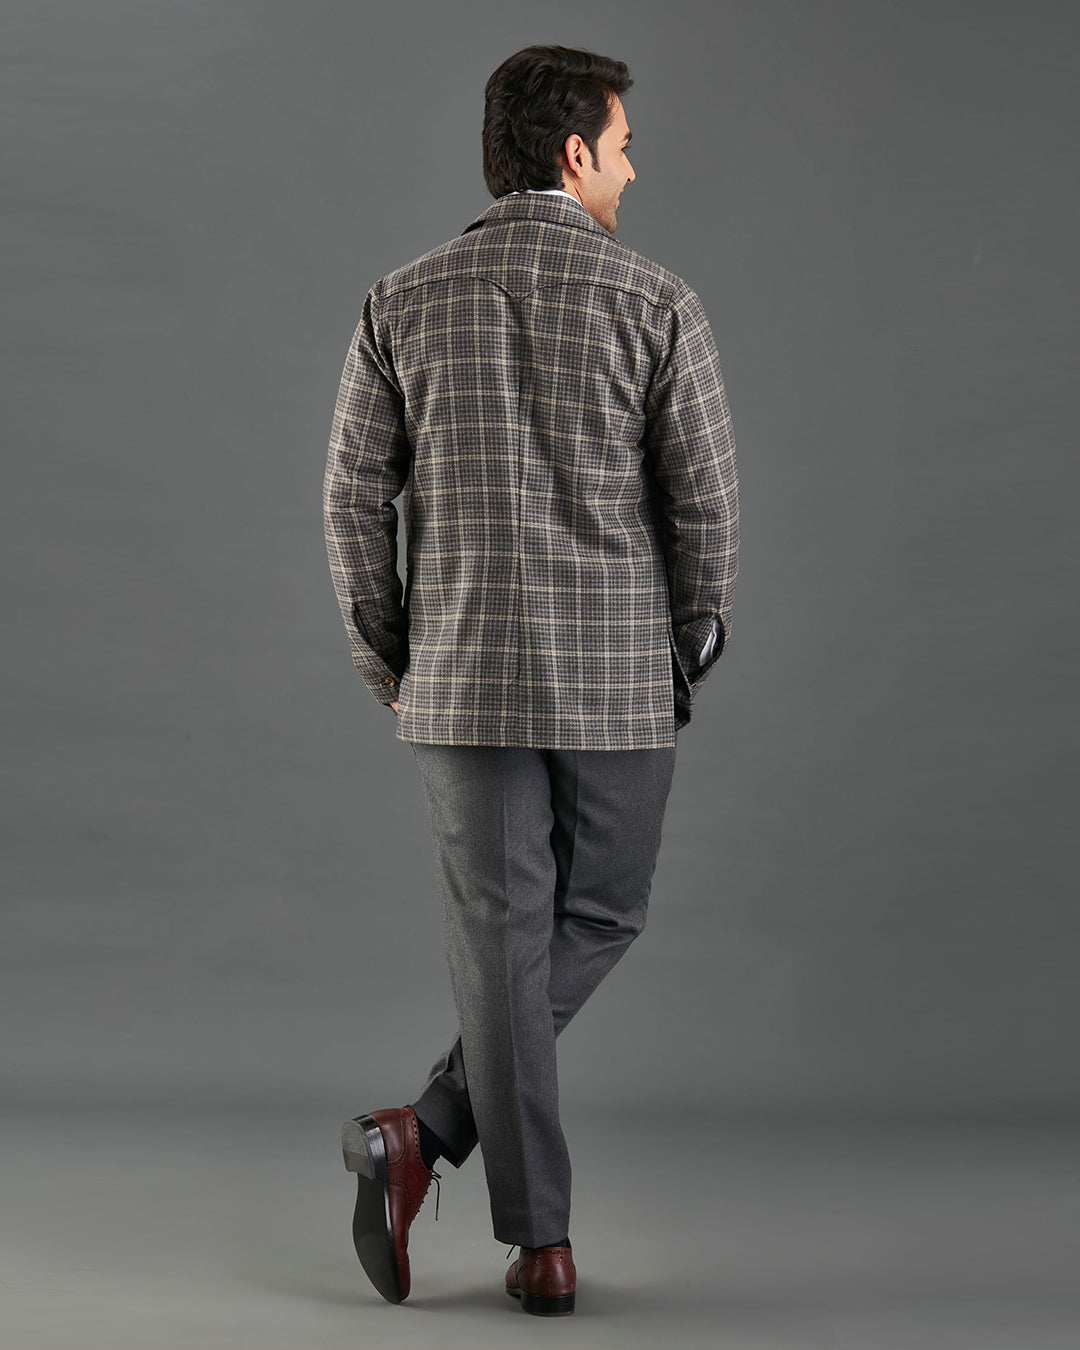 Back of model wearing the shirt jacket for men by Luxire in brown and grey overchecks